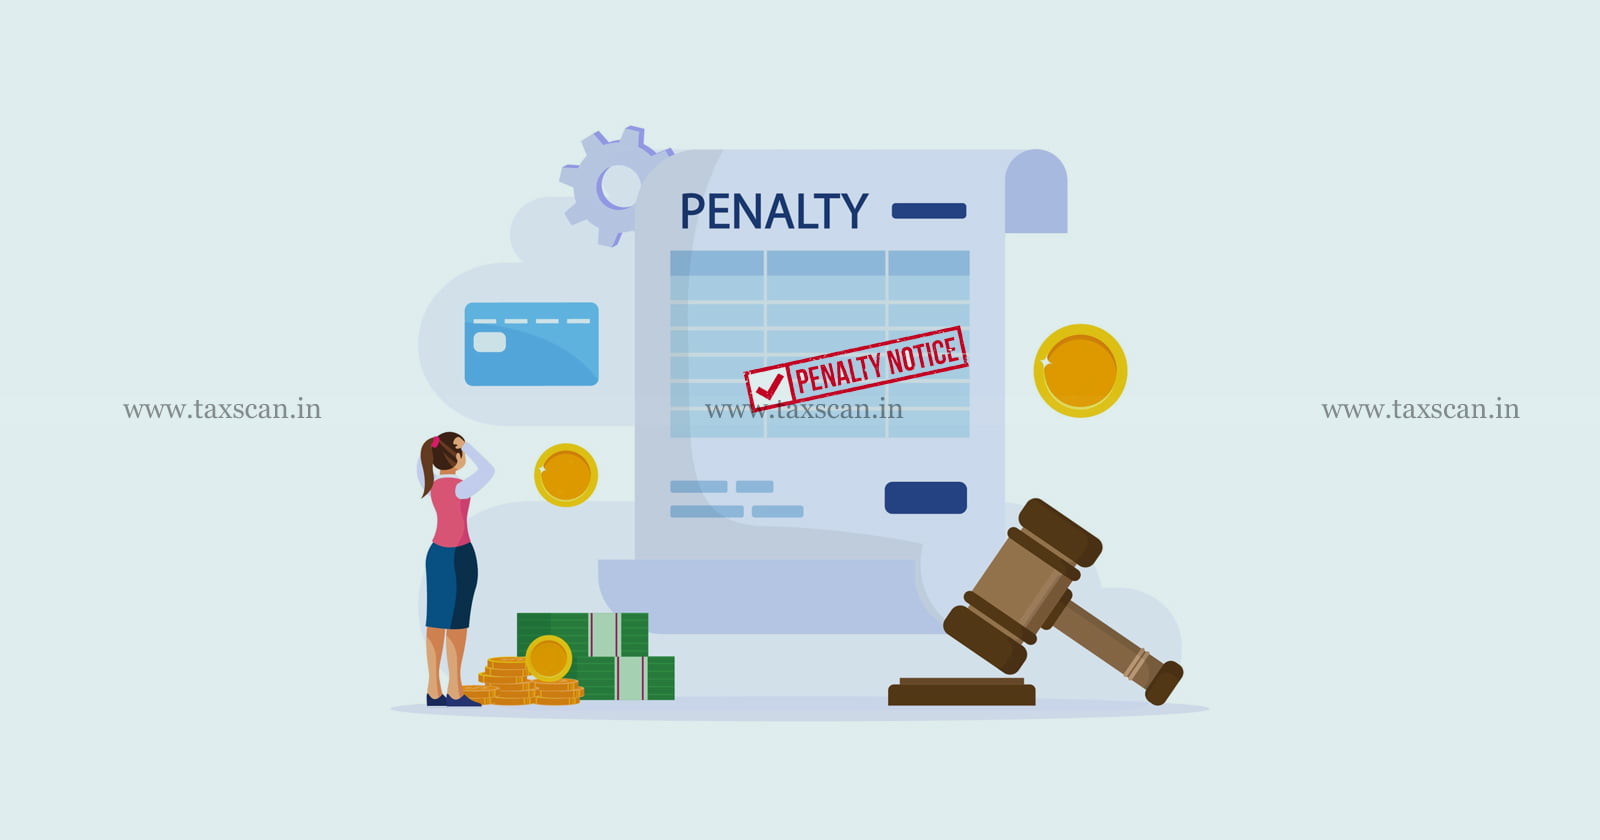 Penalty Notice - Penalty - Notice - Income Tax Act - Income Tax - Tax - ITAT - taxscan